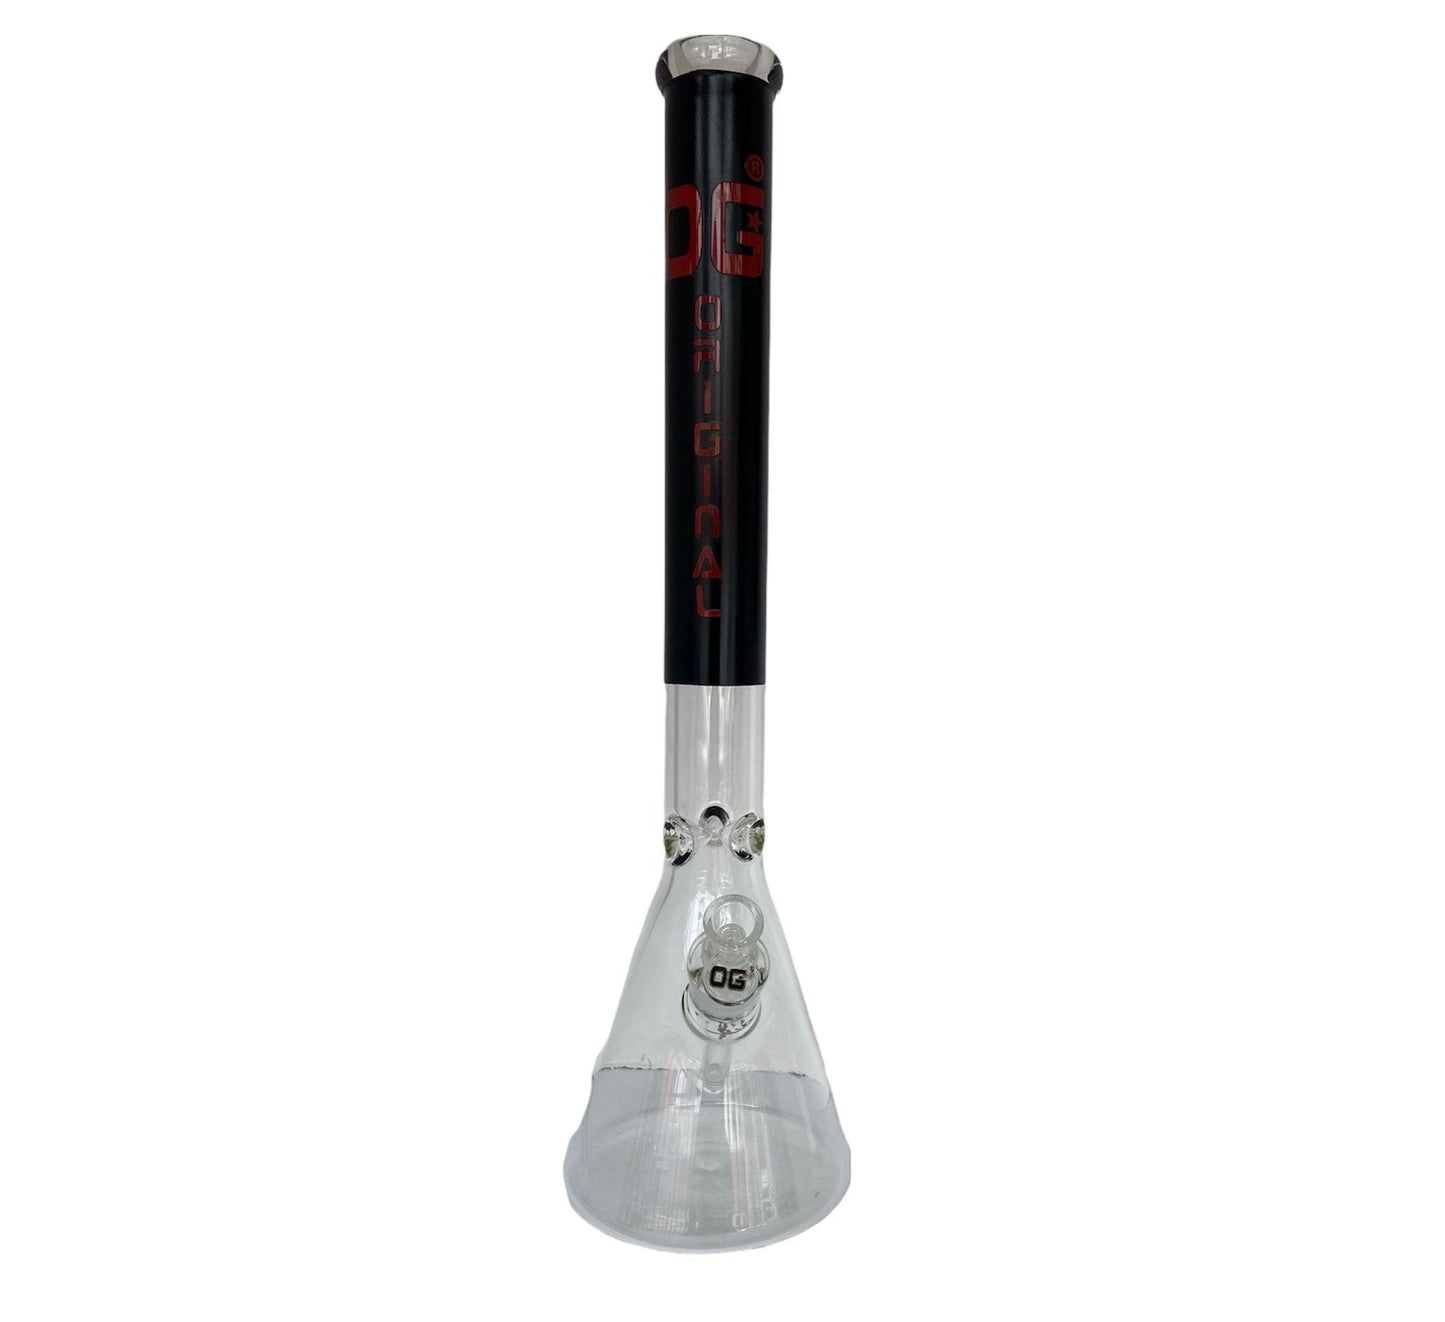 Red OG 7mm Colored Neck Bong (21") - Glass Bong - The Wee Smoke Shop